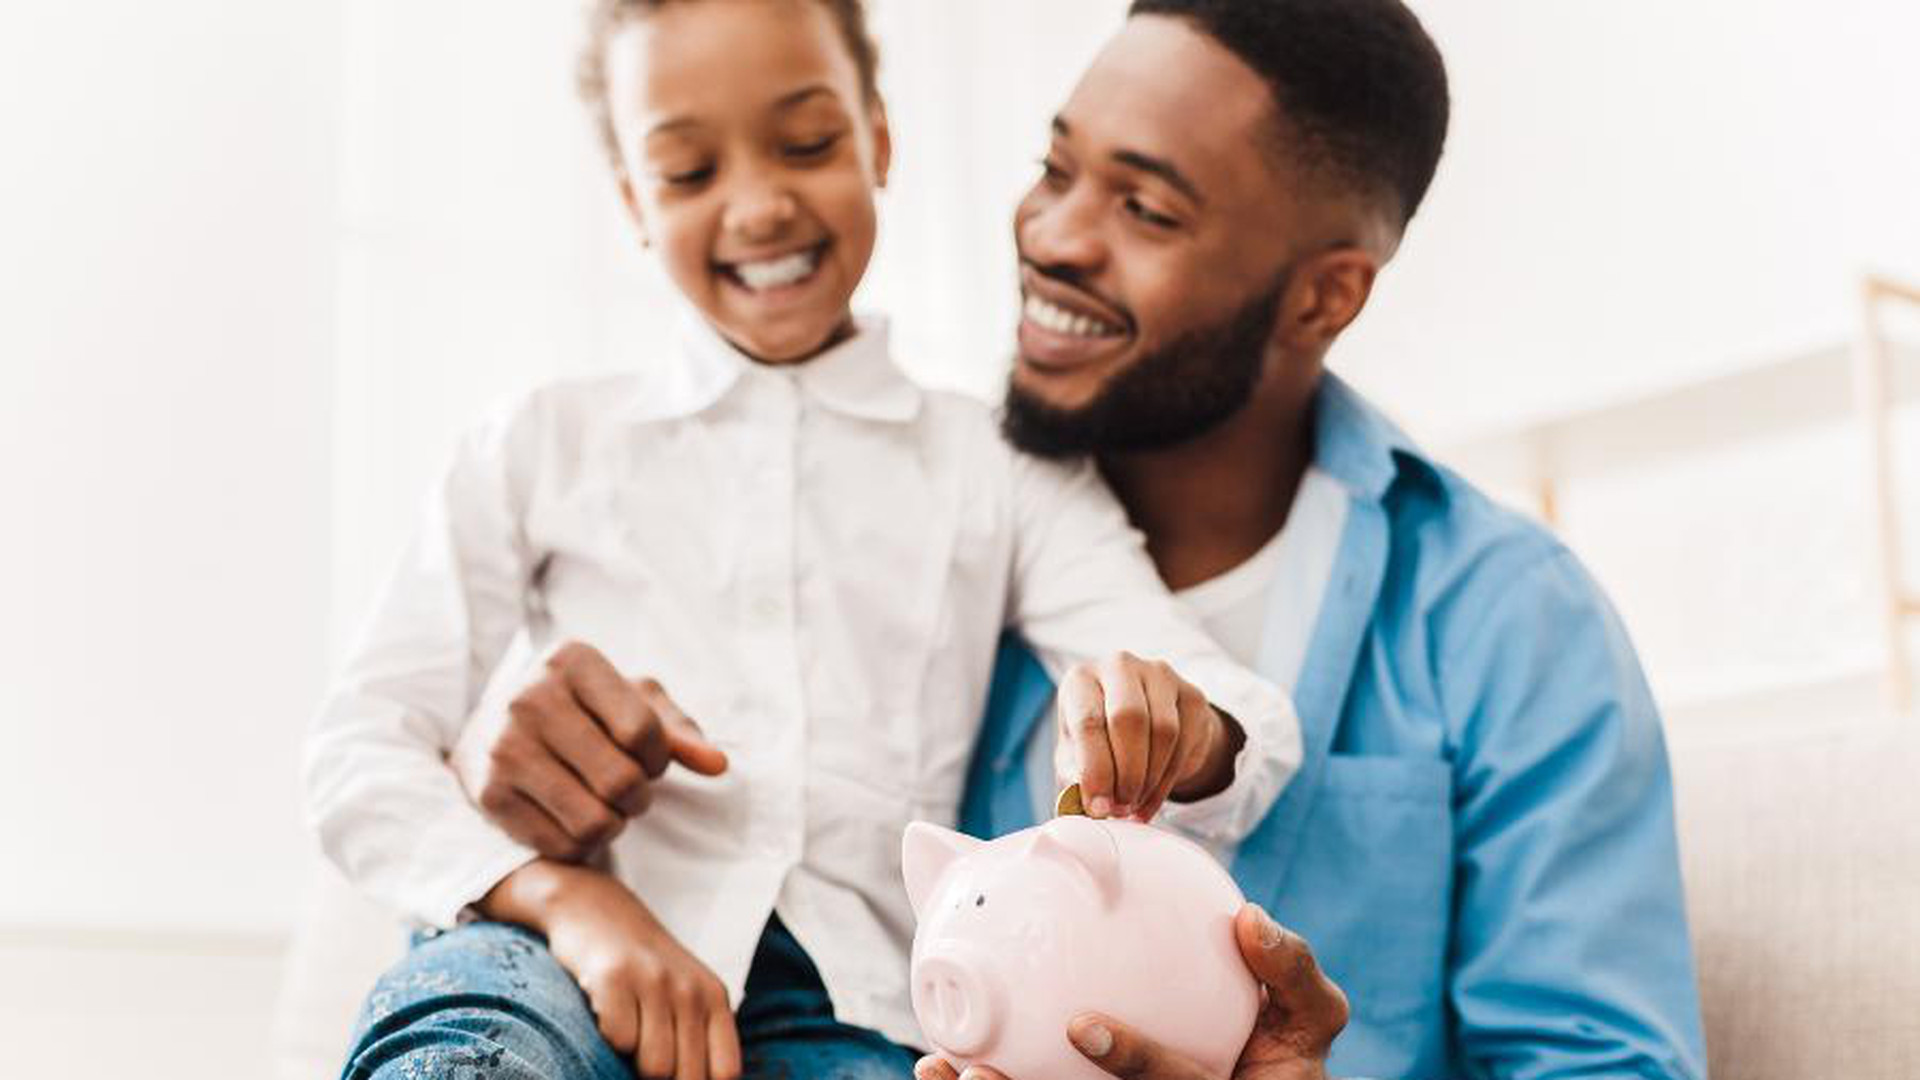 The Kid Roth: Build Your Child A Tax-Free Nest Egg And Teach Savings Over Spending